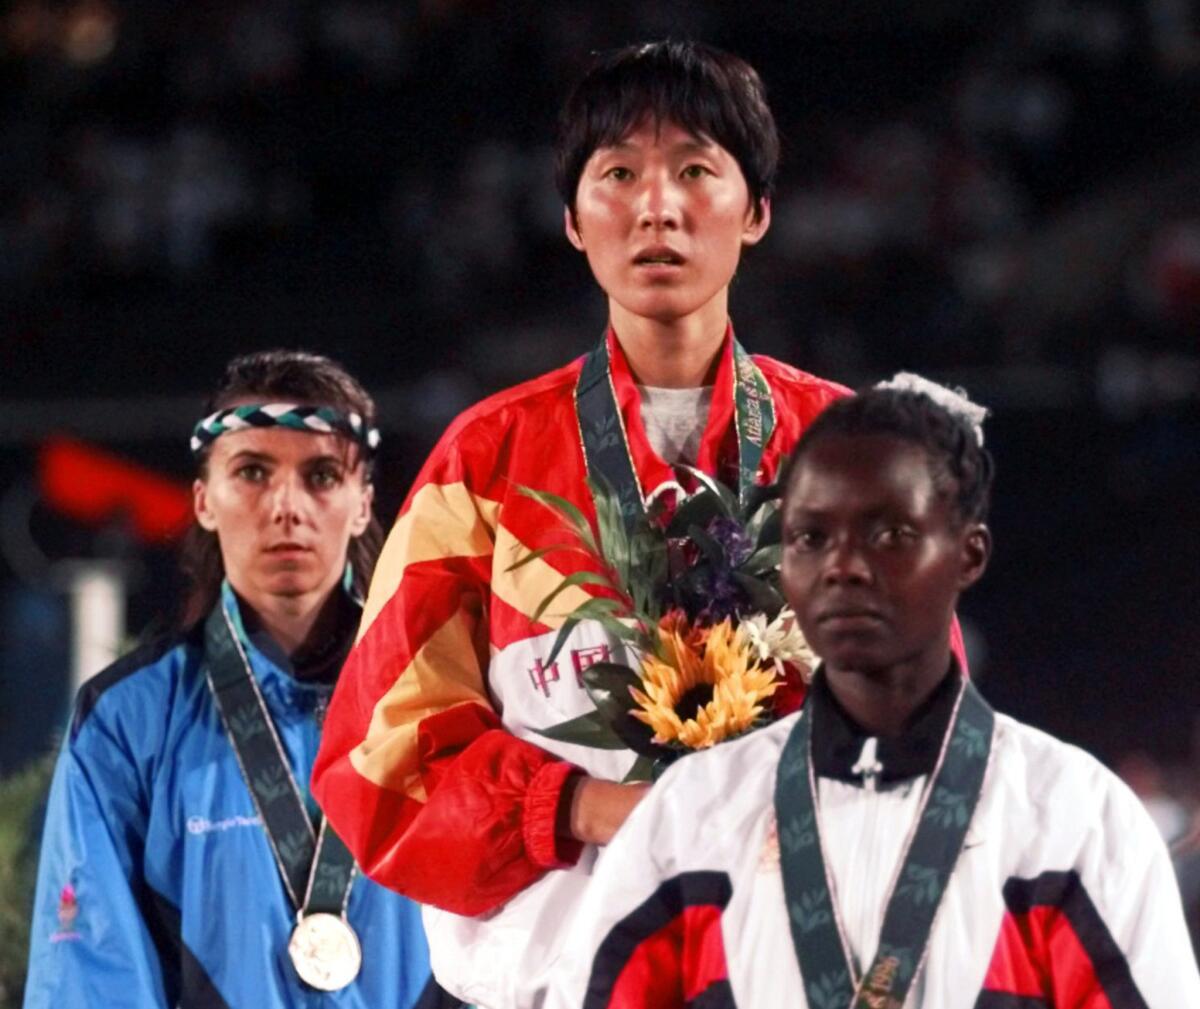 Women's 5,000-meter gold medalist Wang Junxia of China, center, is flanked by Kenya's Pauline Konga, right, and Italy's Roberta Brunet at the Atlanta Olympics on July 28, 1996.